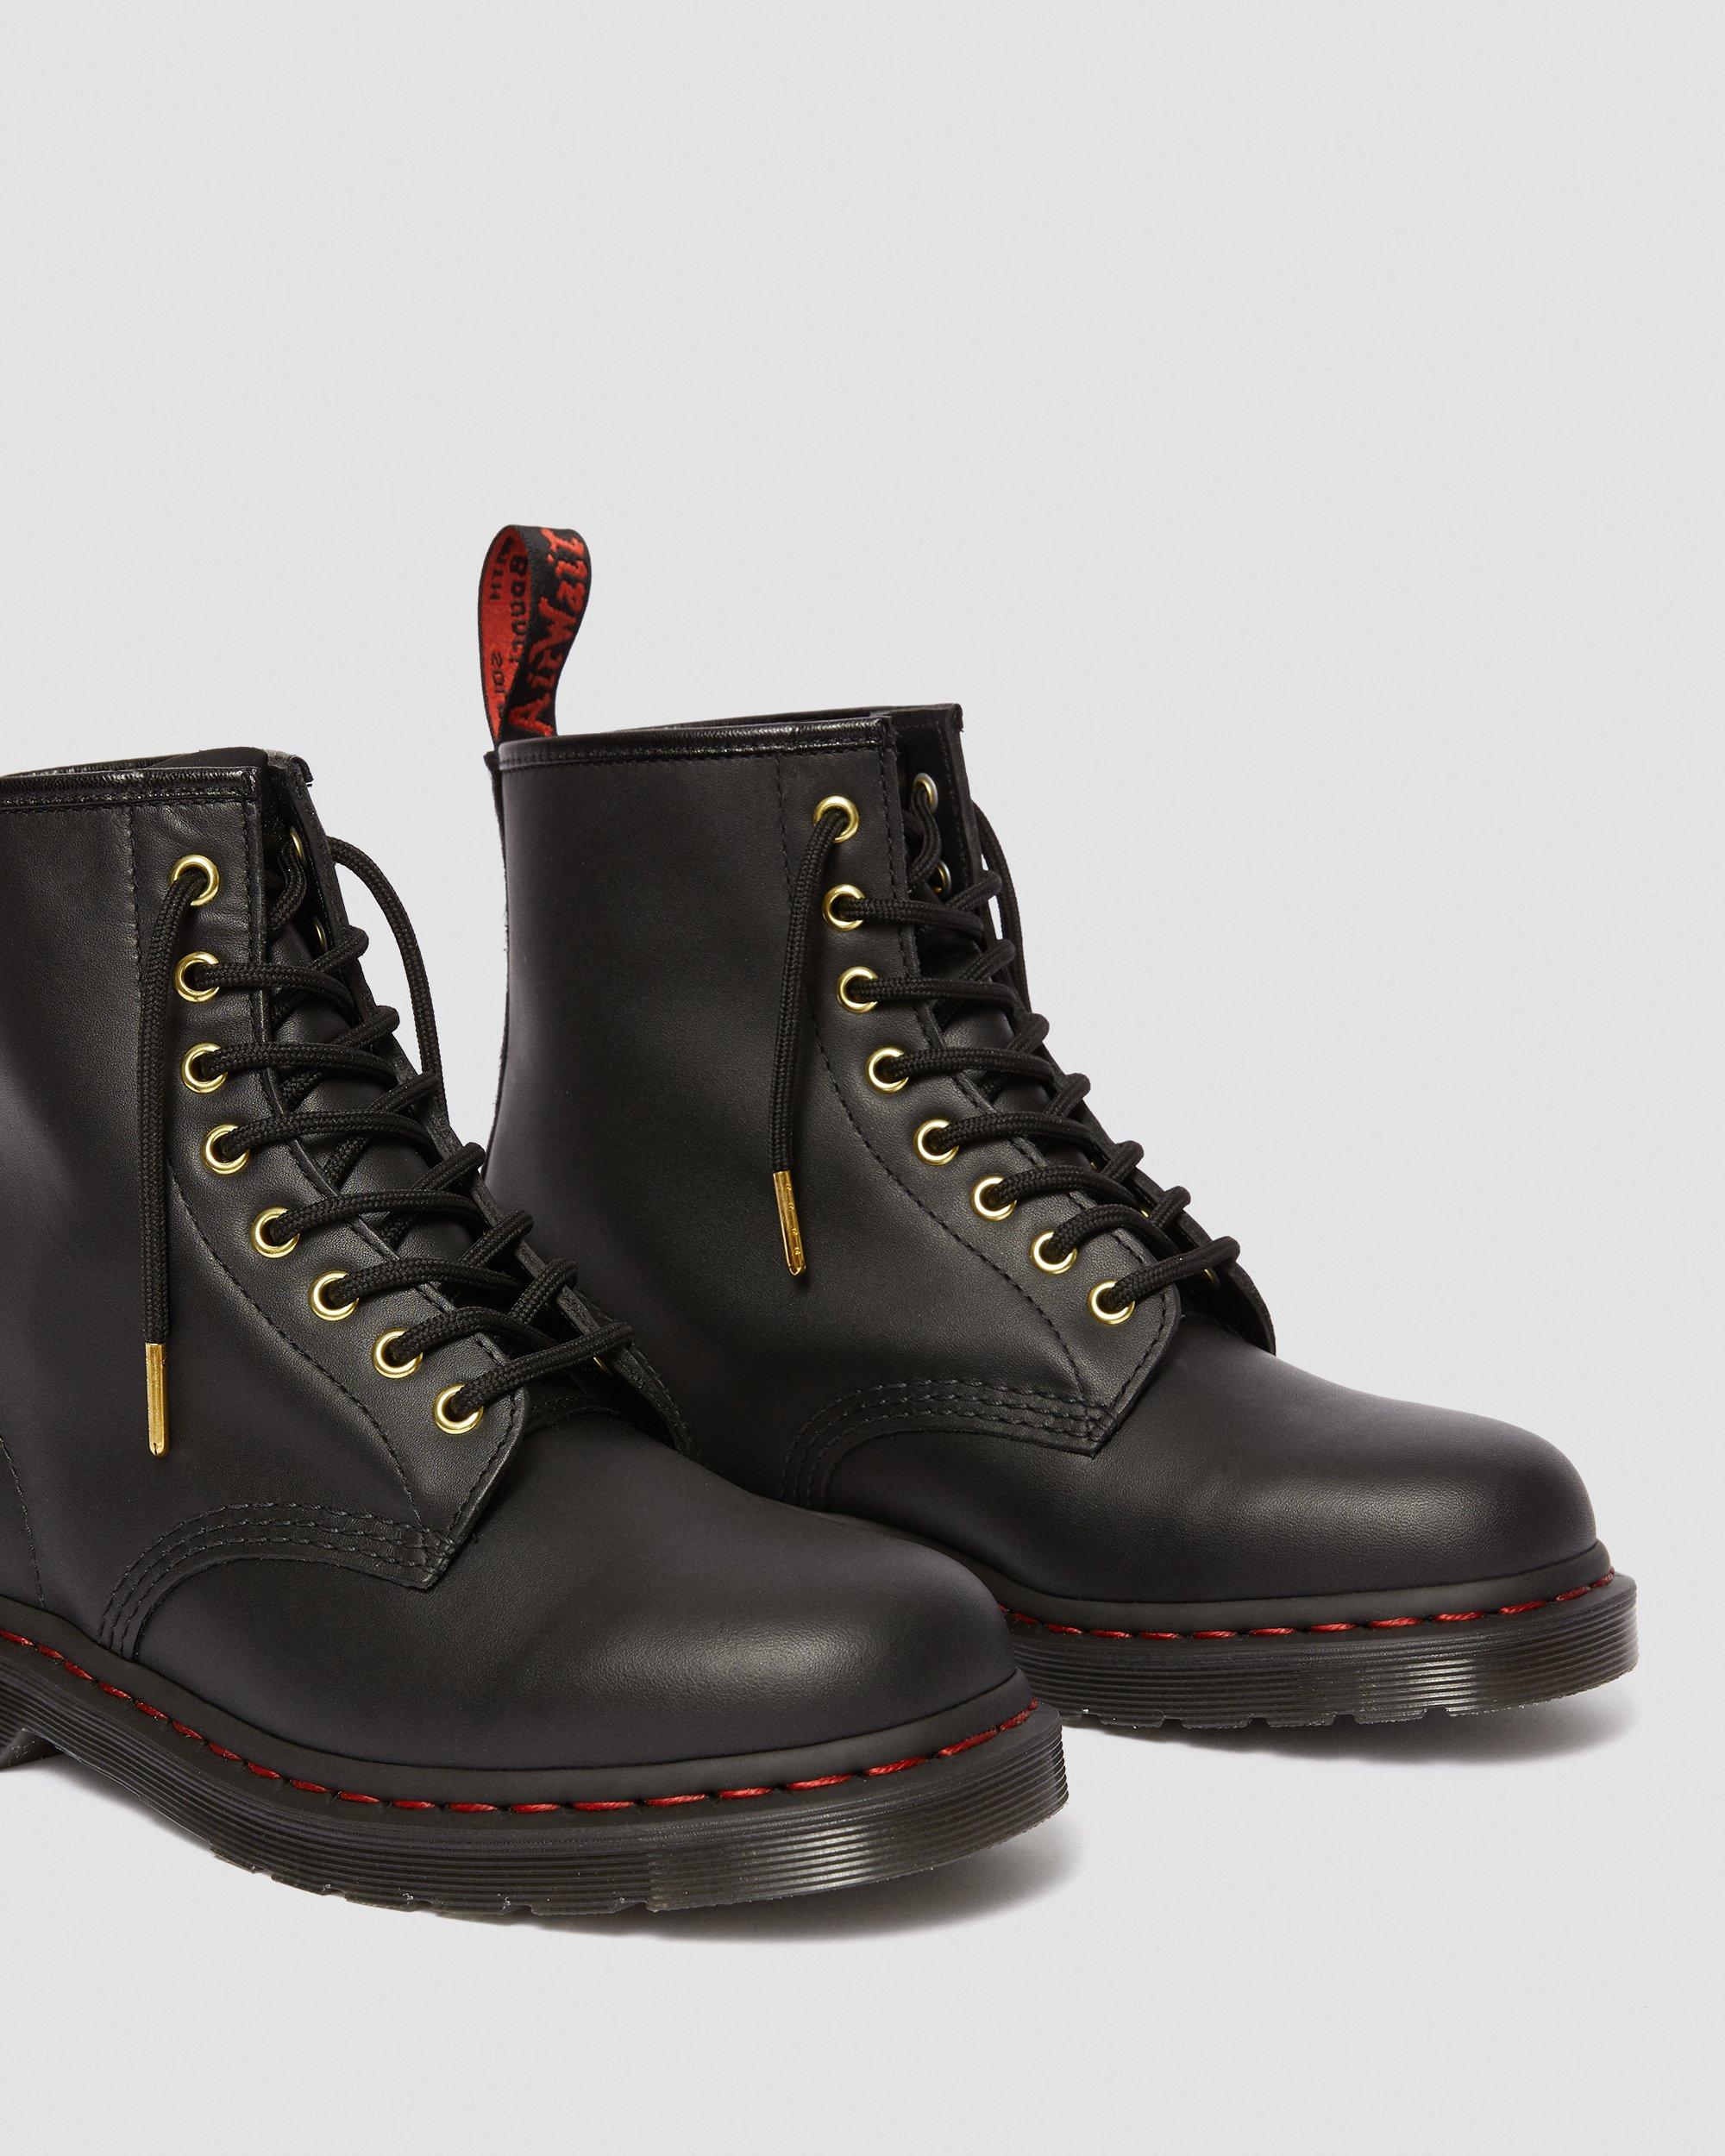 1460 CHINESE NEW YEAR LEATHER ANKLE BOOTS Dr. Martens